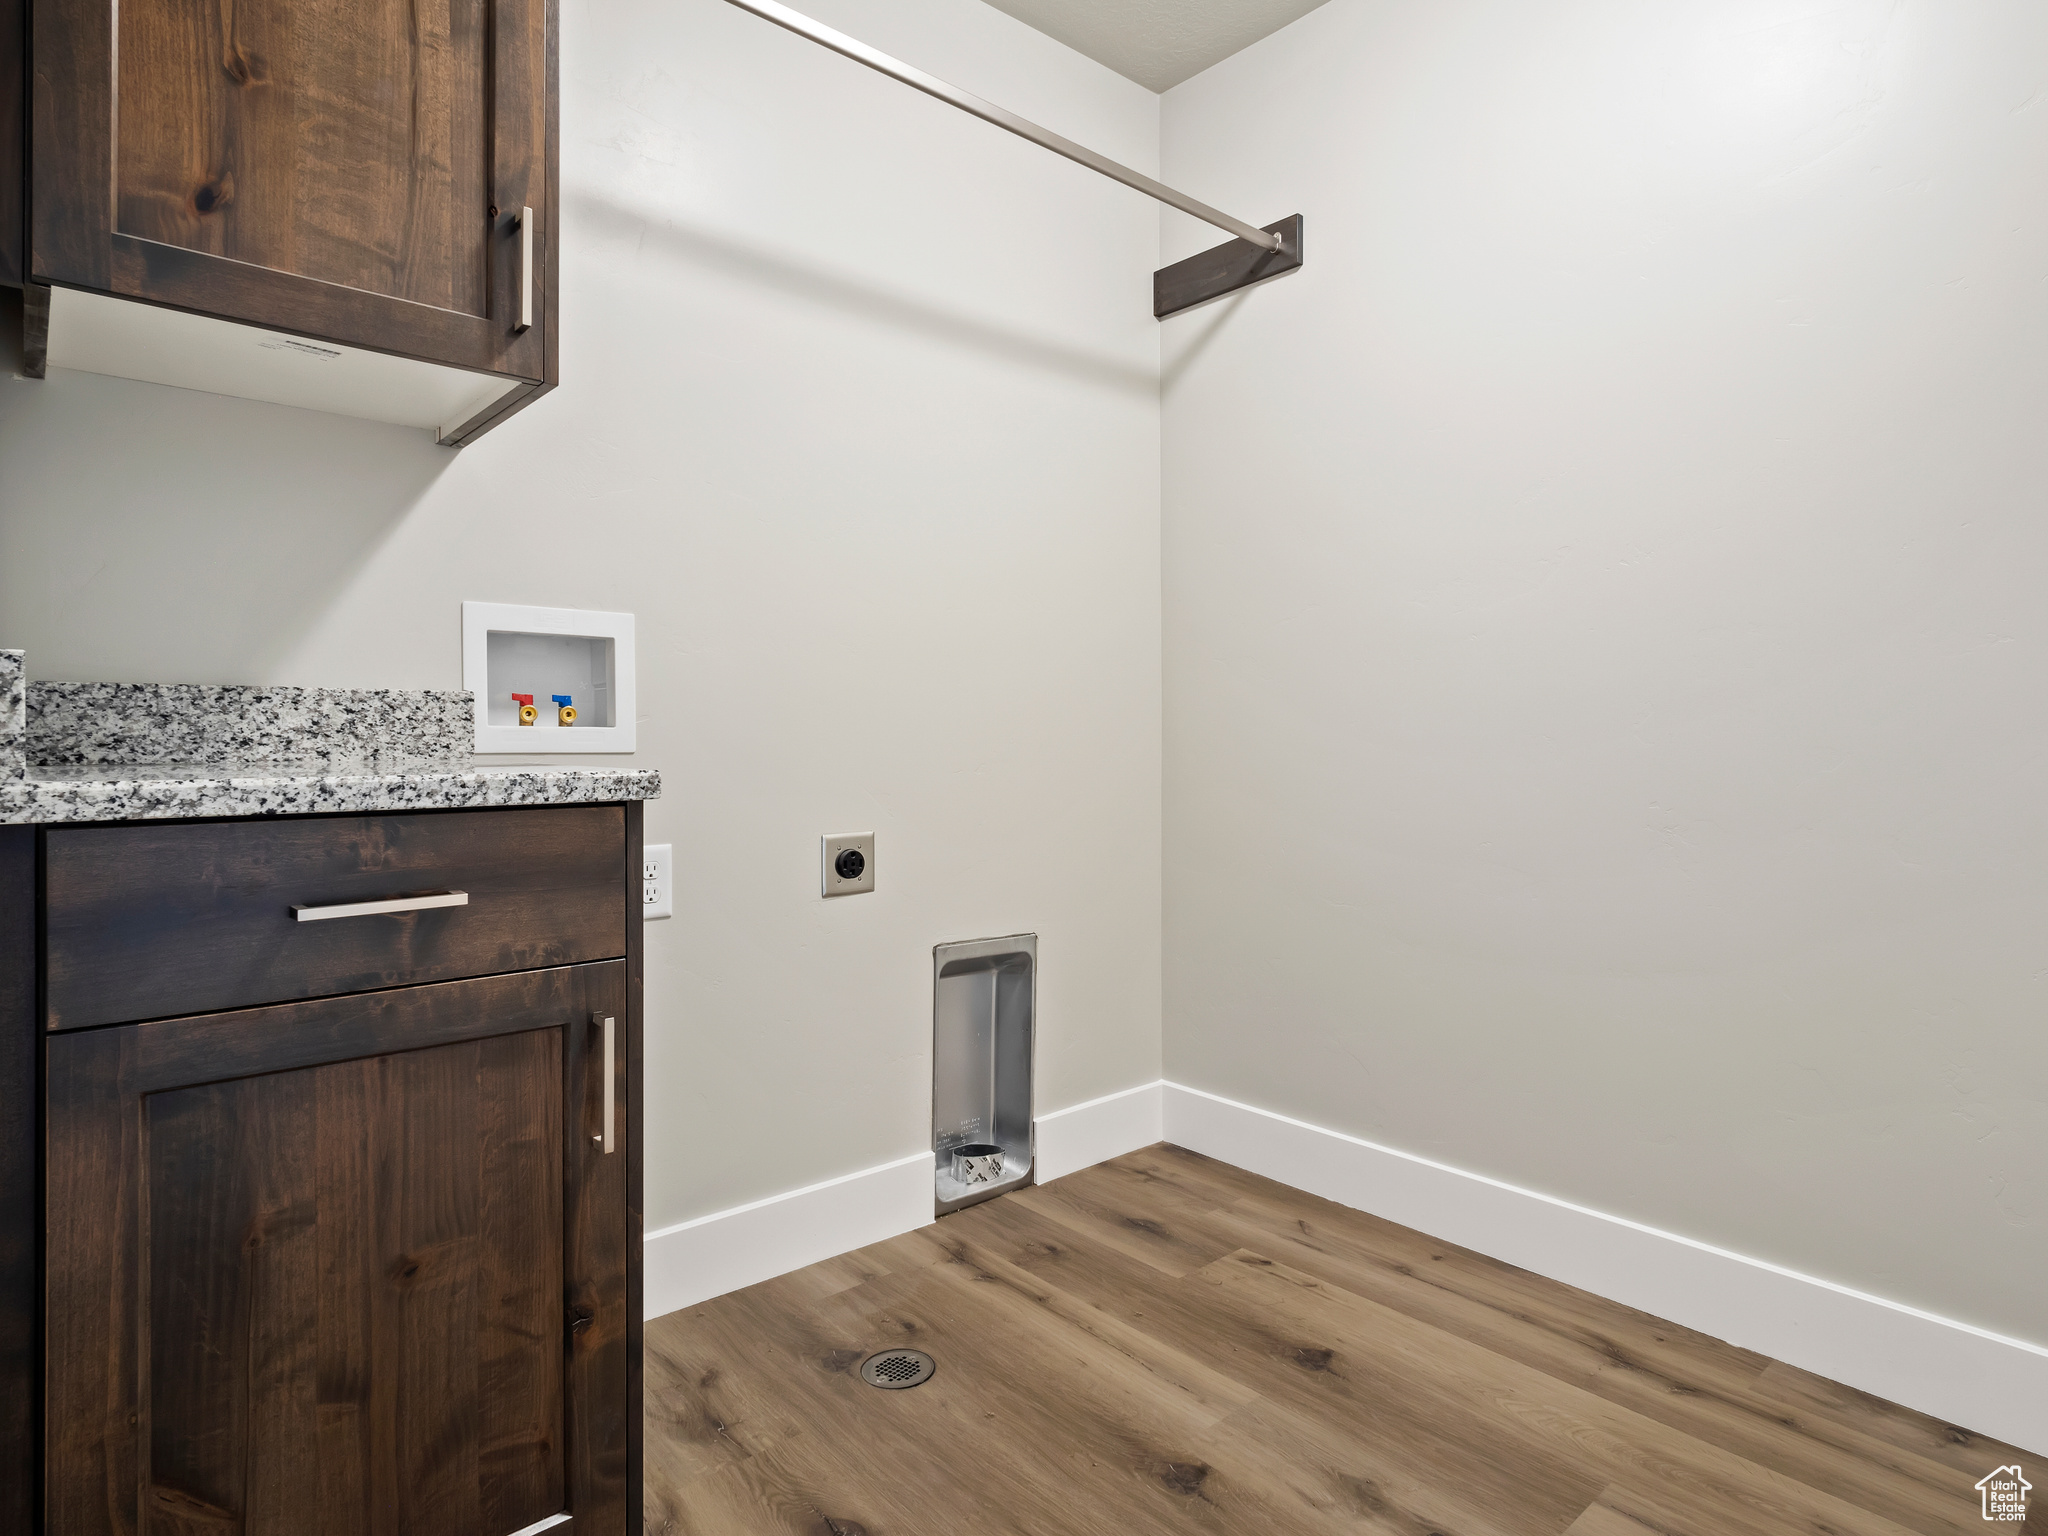 Laundry room featuring hookup for an electric dryer, dark hardwood / wood-style flooring, cabinets, and washer hookup